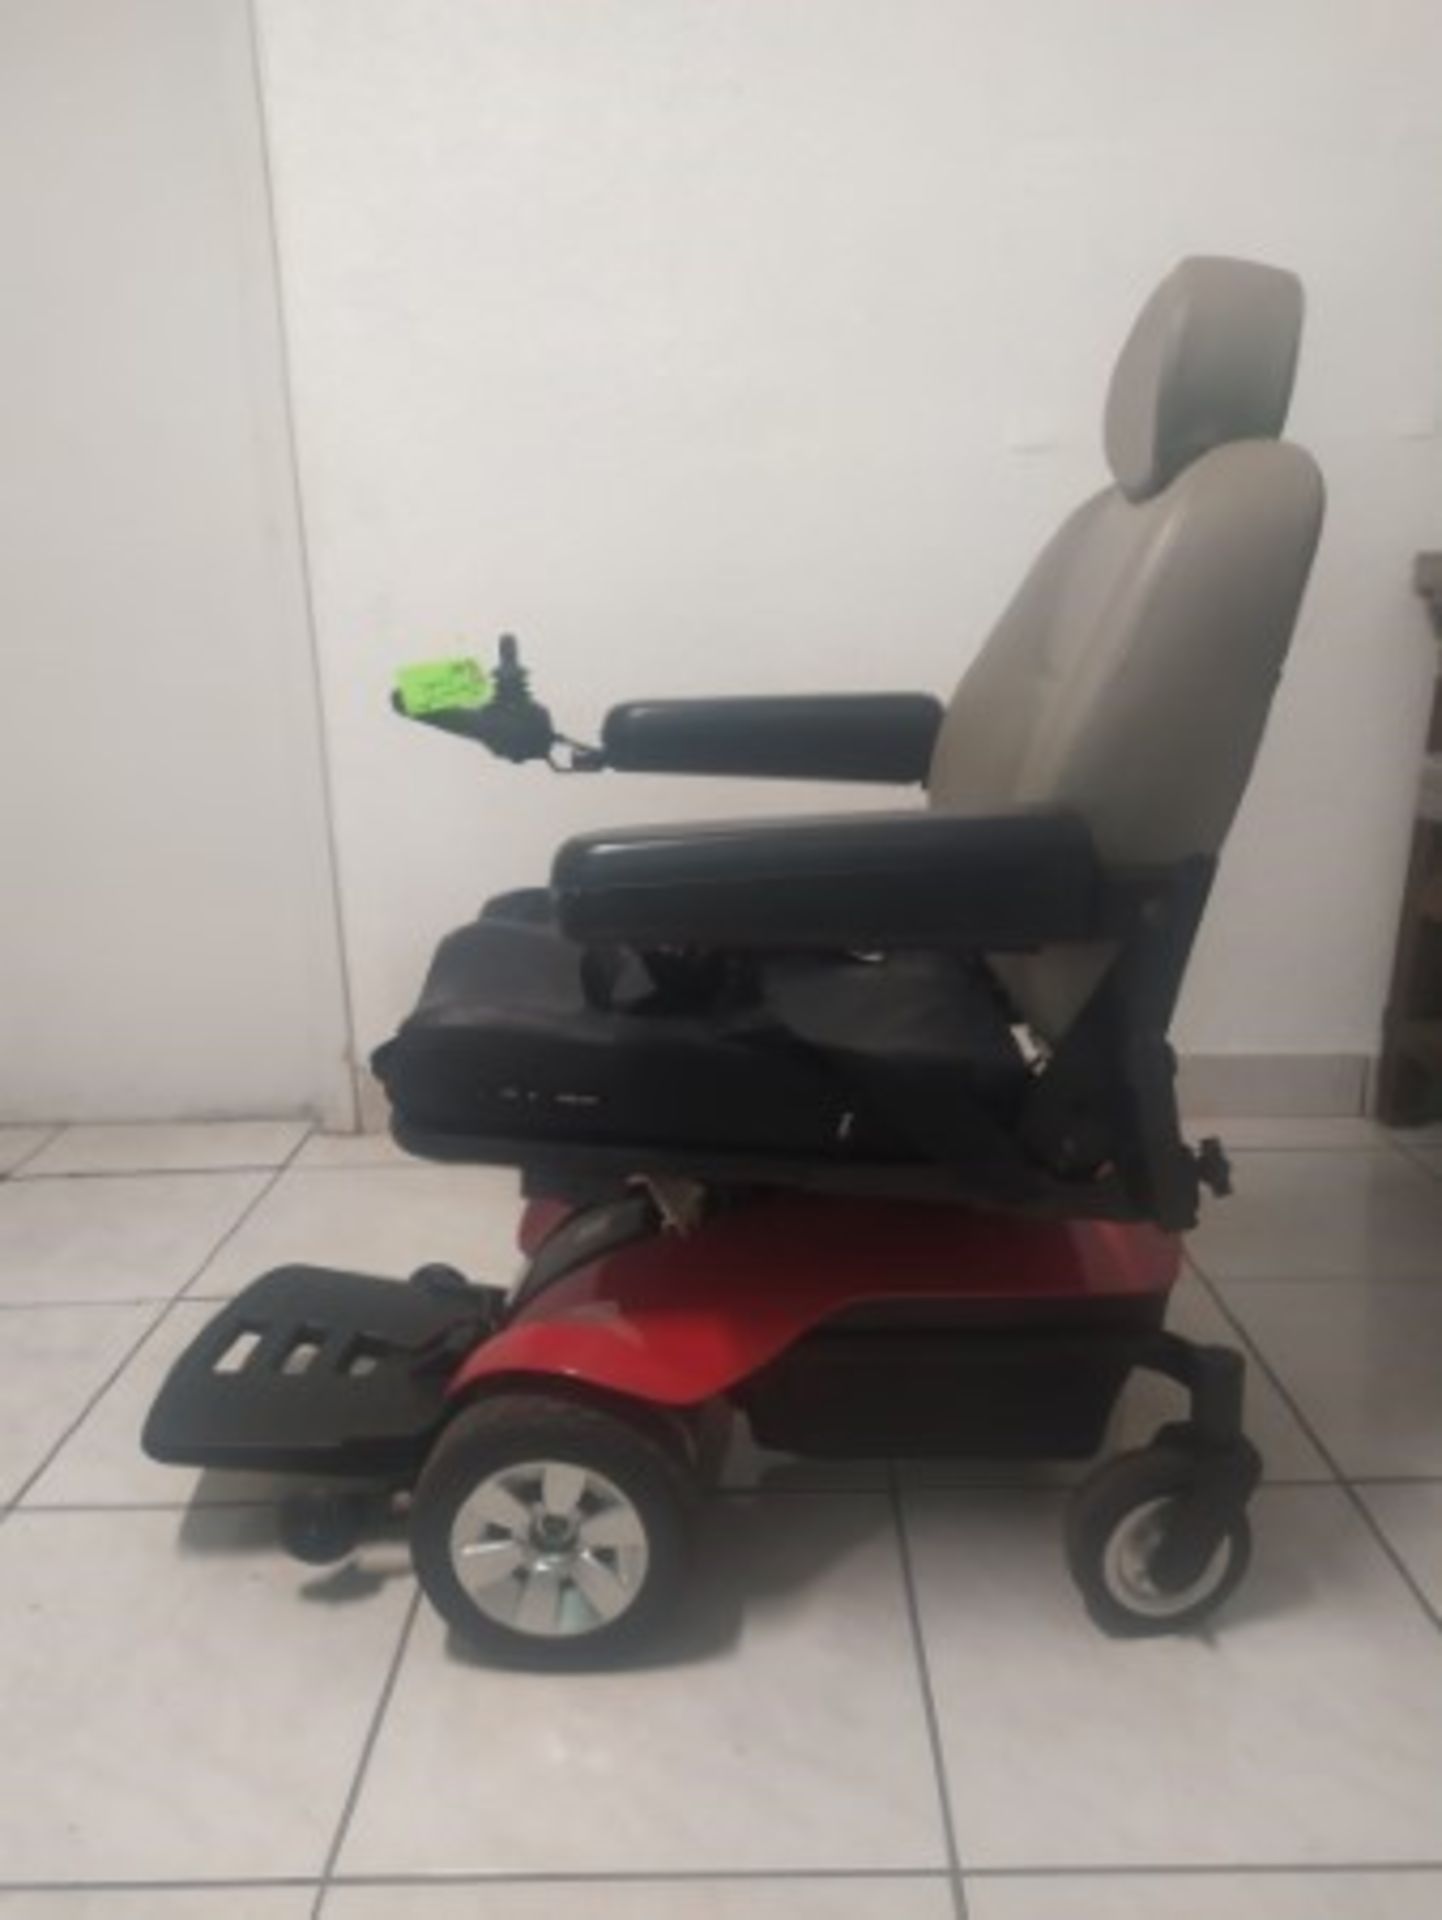 2015 PRIDE TSS300 6-WHEEL POWER CHAIR WITH JOYSTICK CONTROL - RED - 300LB CAPACITY - SERIAL No. JB10